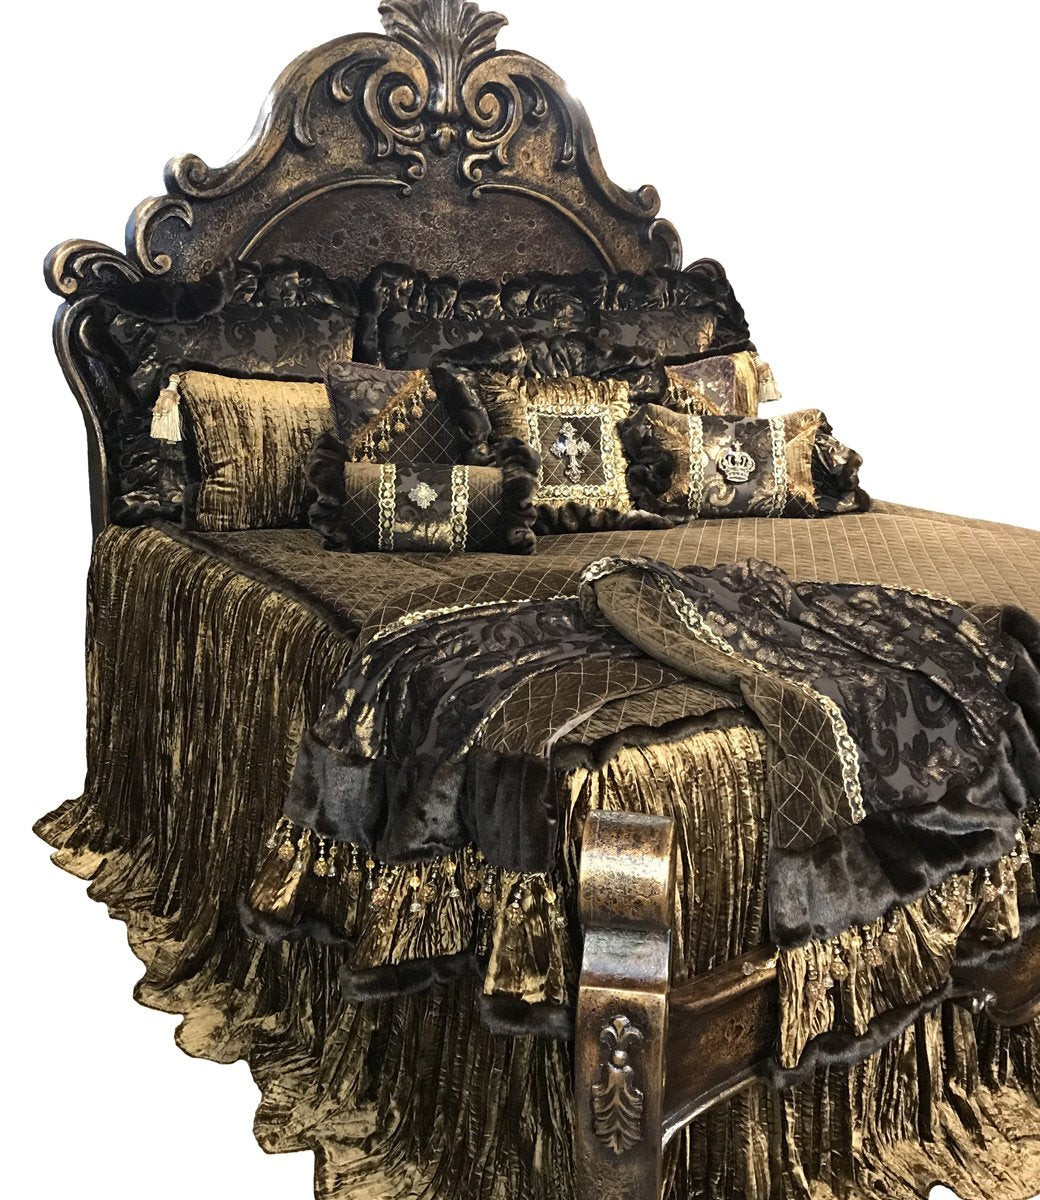 https://reilly-chanceliving.com/cdn/shop/products/Luxury_bedding-Chocolate_brown_bedding_sets-old_world_decor-old_world_bedding-designer_bedding-decorative_pillows-reilly-chance_collection.jpg?v=1605202217